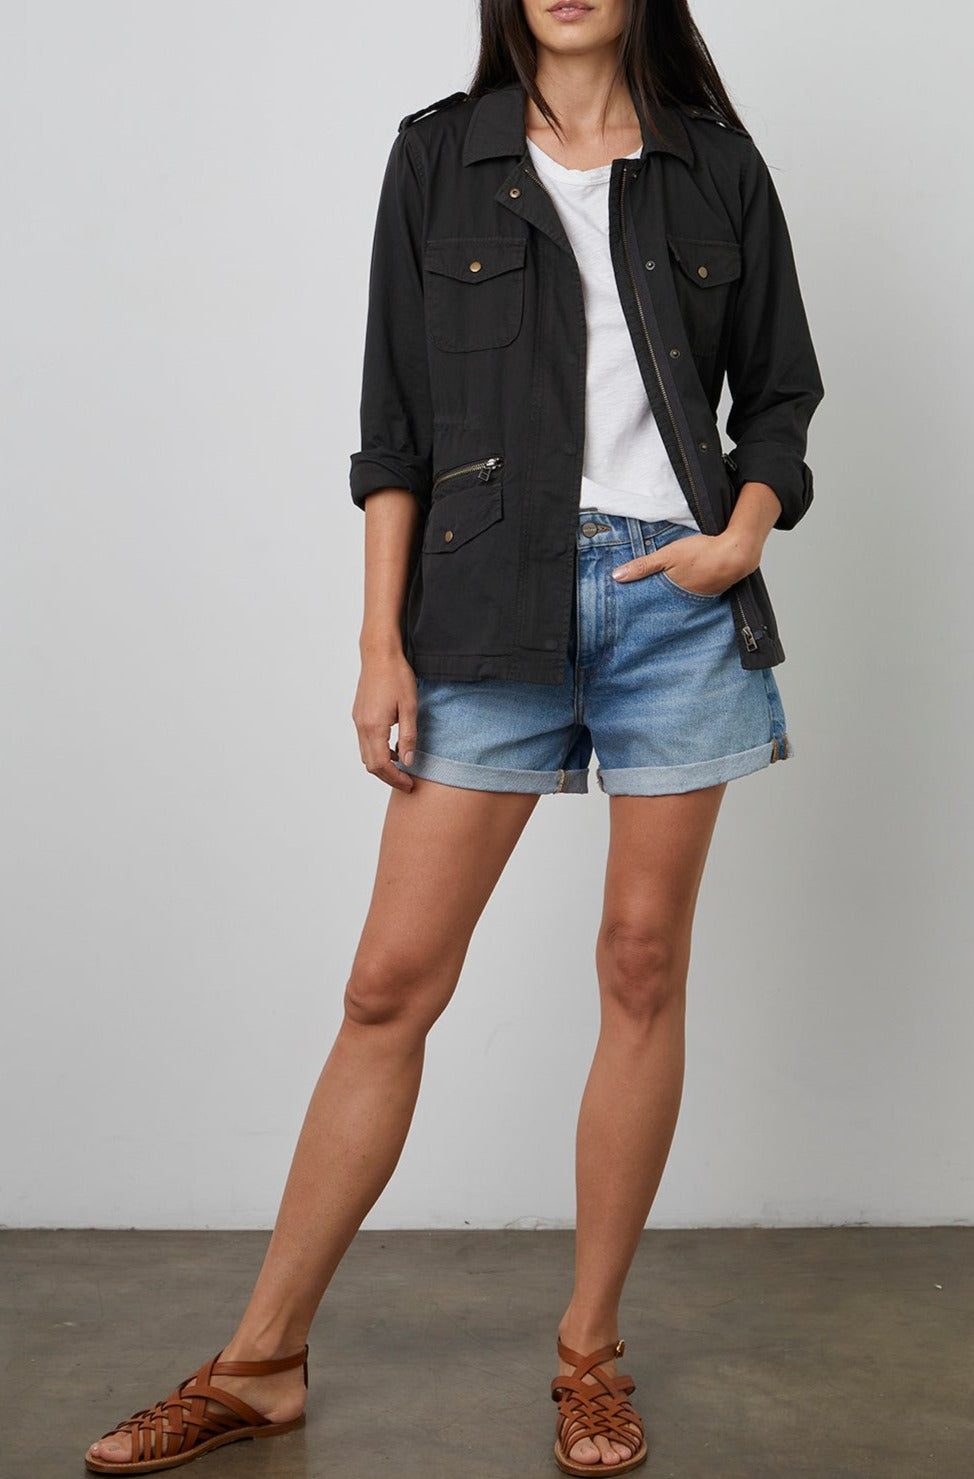 Lily Aldridge's sister confidently sports a Velvet by Graham & Spencer RUBY LIGHT-WEIGHT ARMY JACKET with denim shorts.-35207199621313